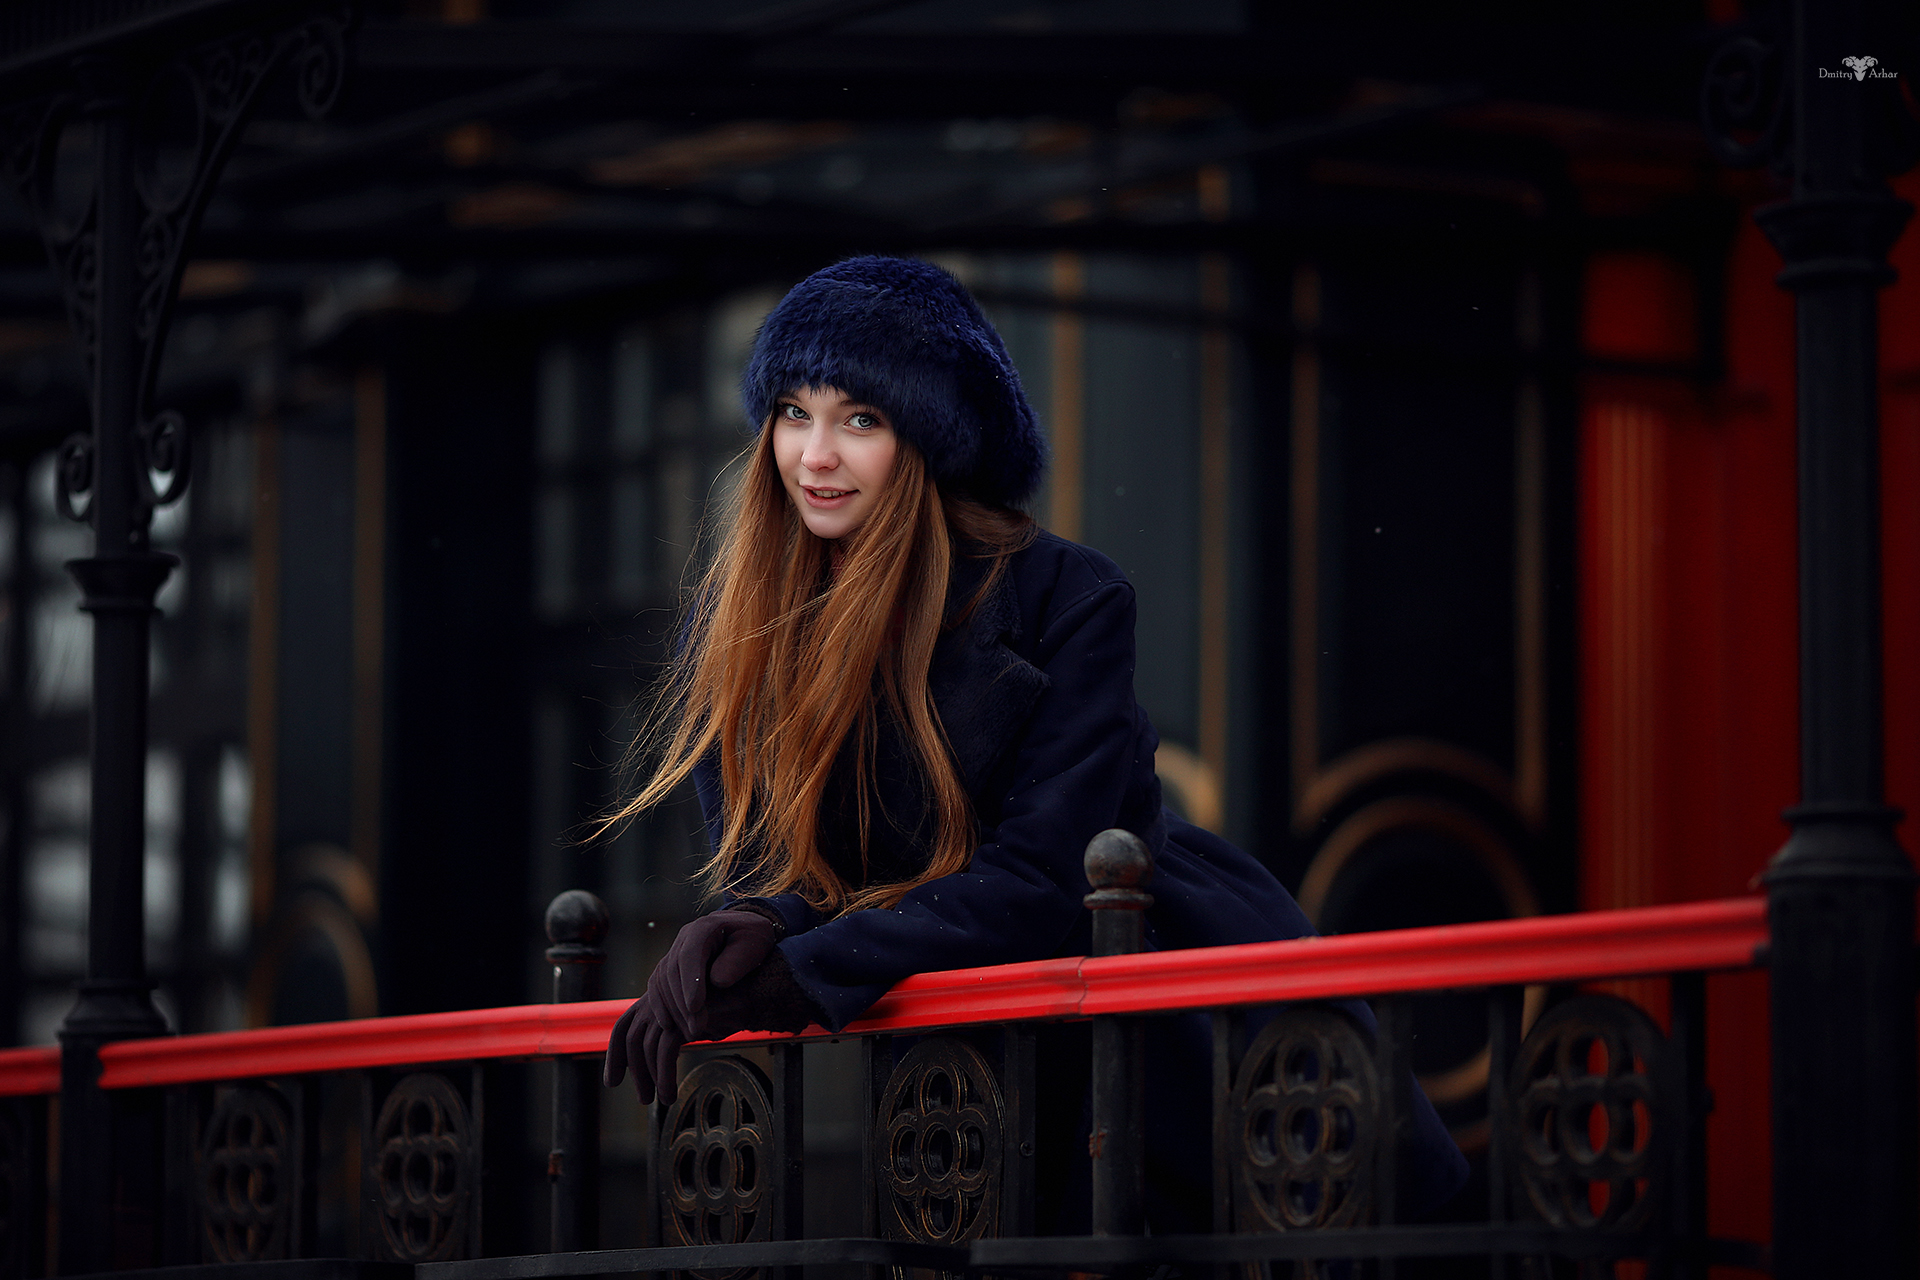 People 1920x1280 Dmitry Arhar women model Russian women Russian model looking at viewer sensual gaze arched back depth of field green eyes hat redhead smiling coats gloves fur cap blue coat overcoats Christina Vostruhina balcony railing blue cap glamour girls glamour fashion classy young women watermarked outdoors